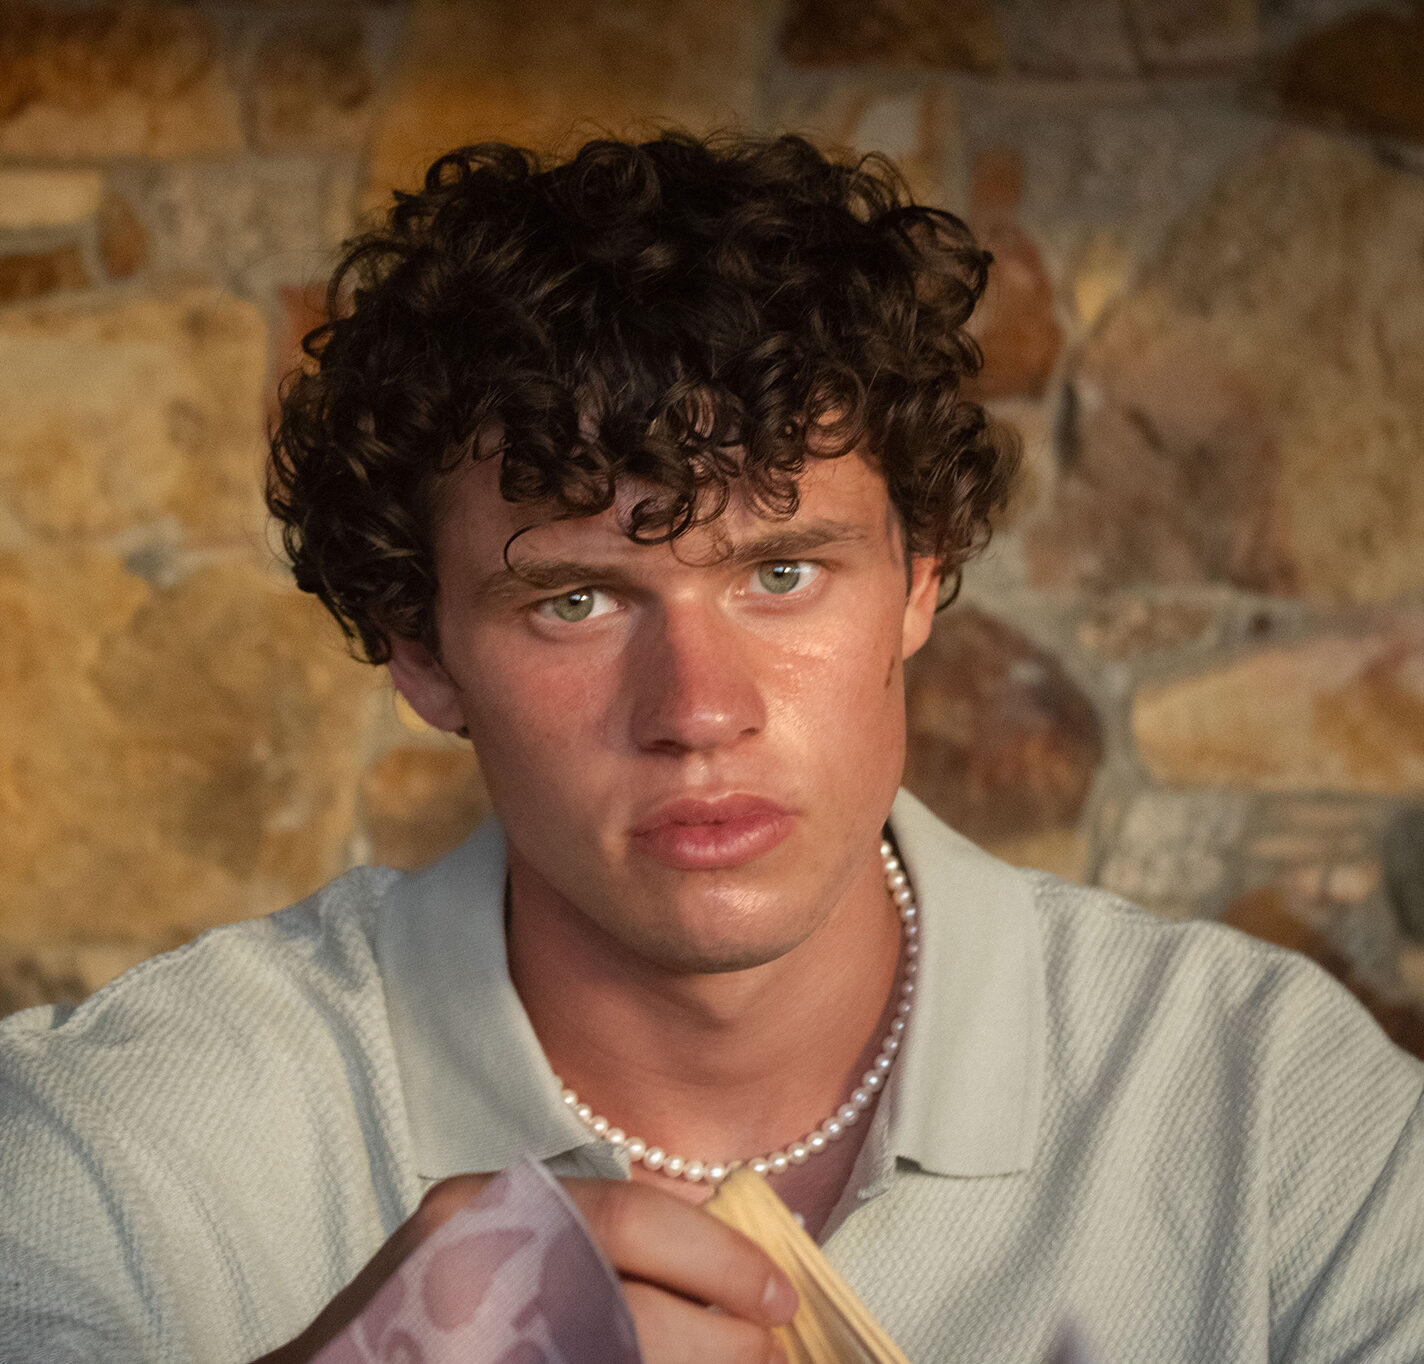 A young boy with curly hair looks intensely into the camera on a stone wall background.